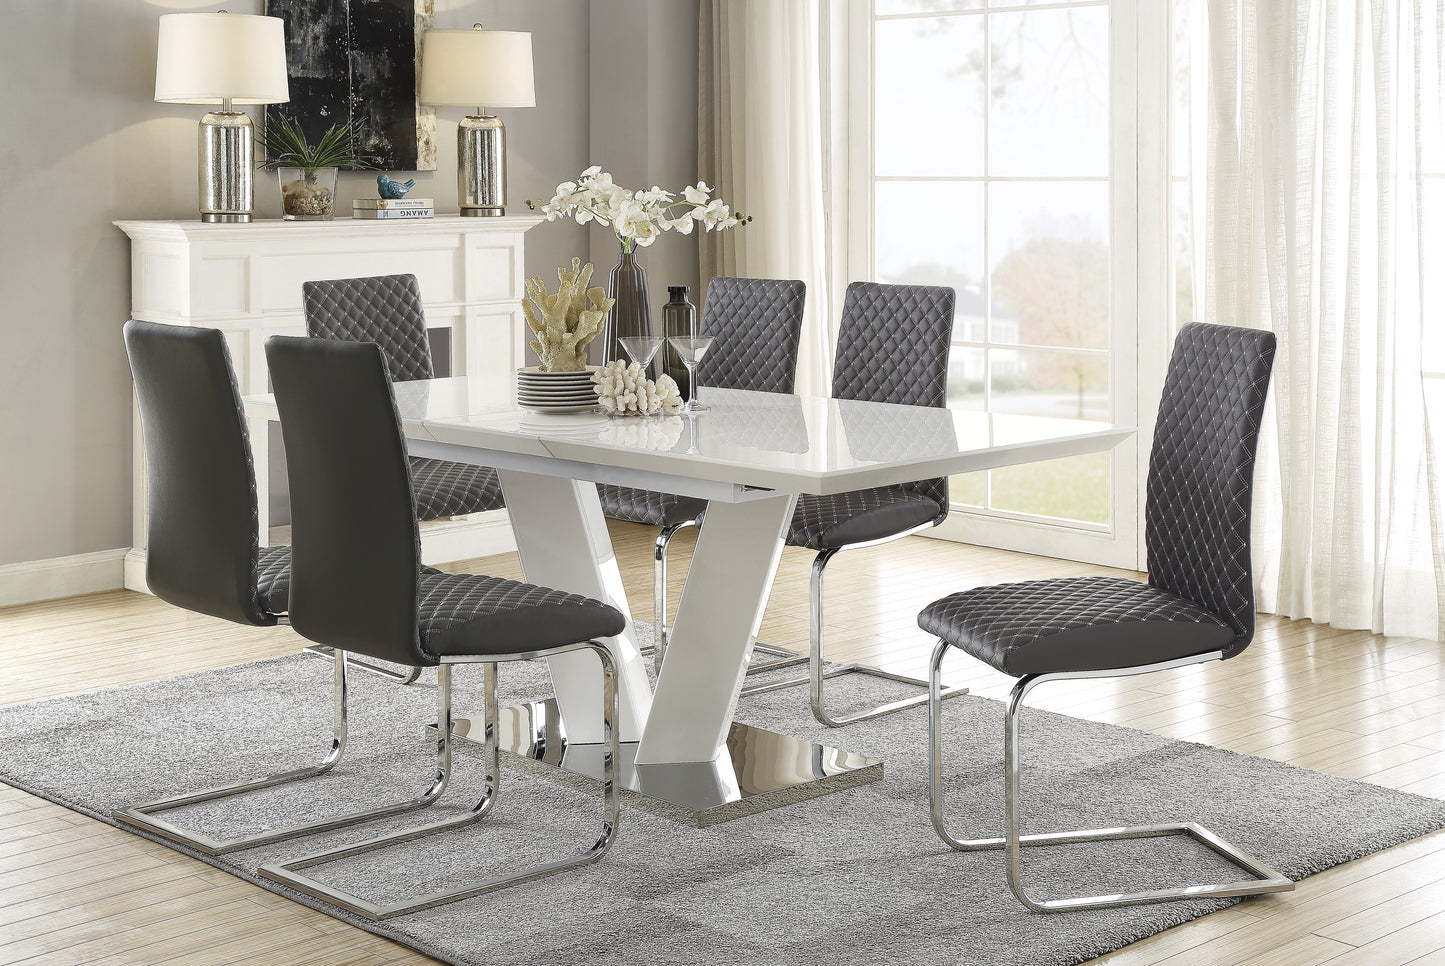 Yannis 5PC Dining Set- Table & 4 chairs White only, Chairs Grey only